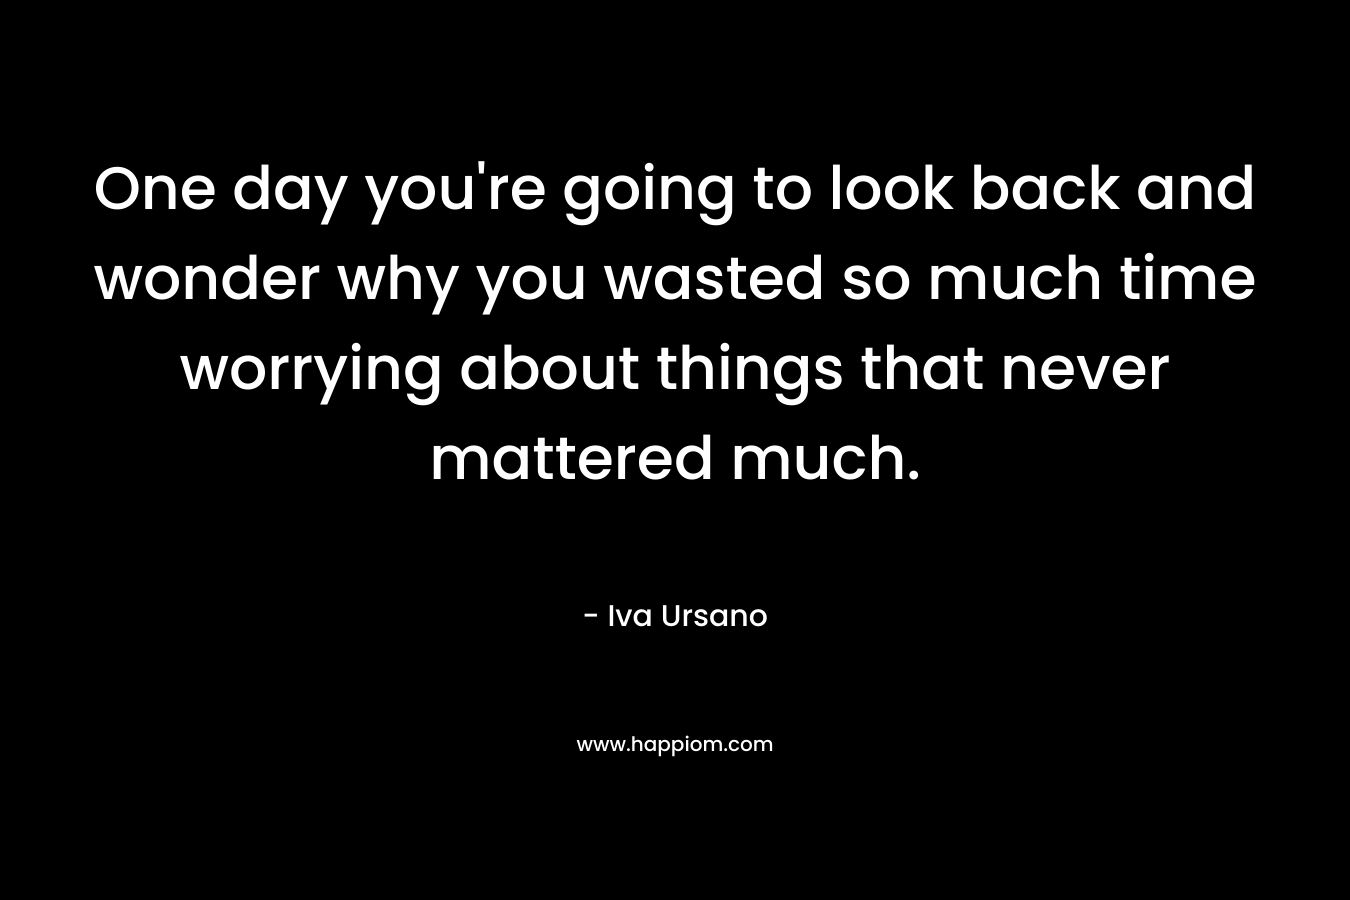 One day you're going to look back and wonder why you wasted so much time worrying about things that never mattered much.